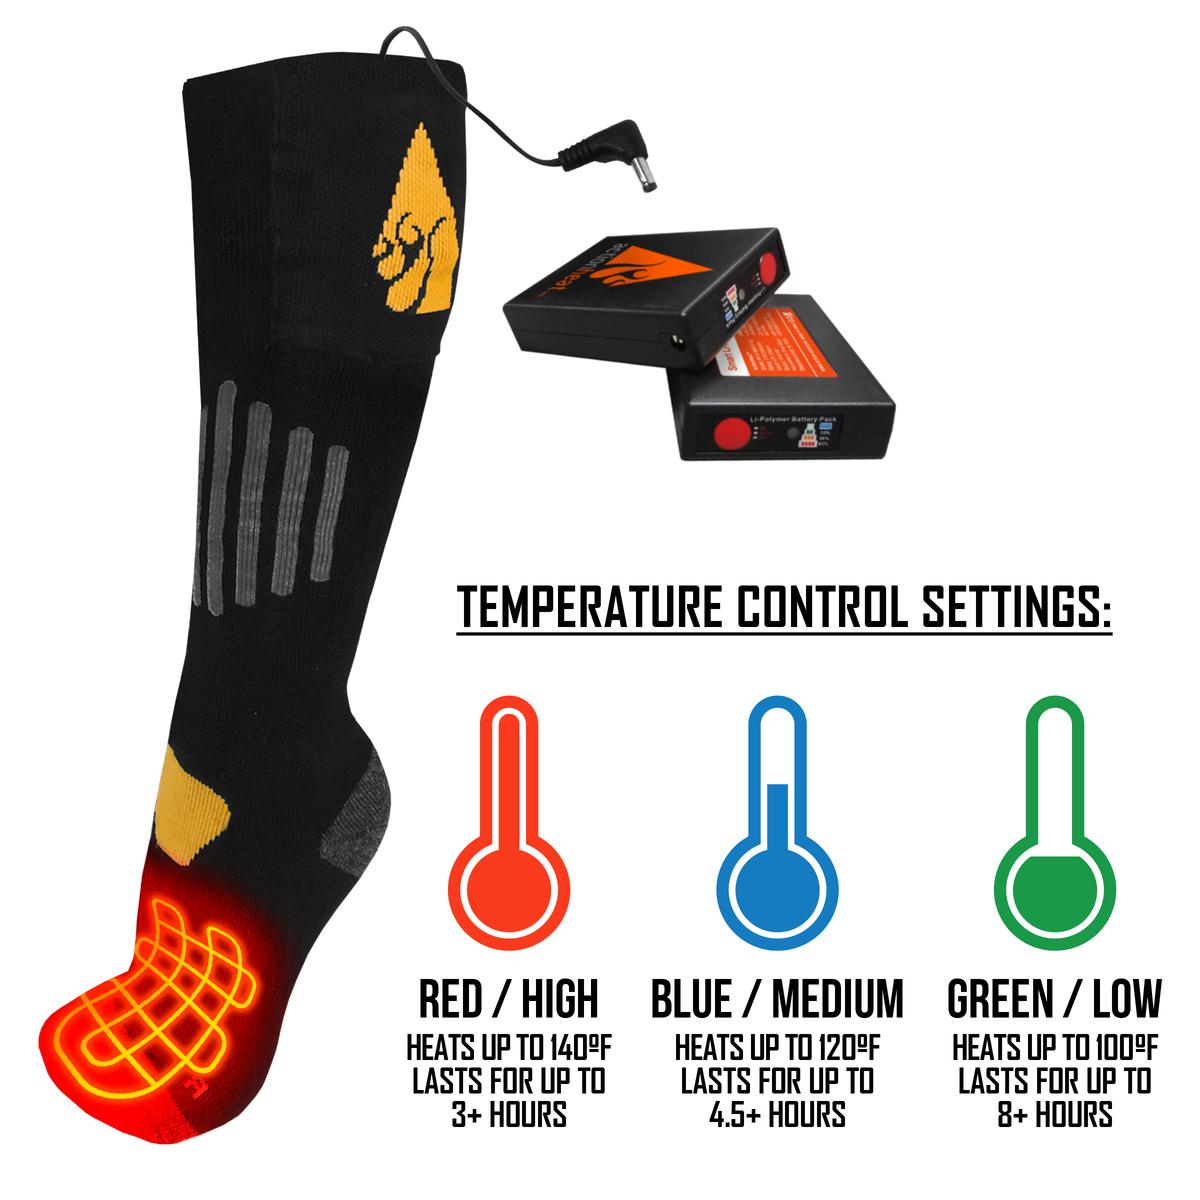 ActionHeat 3V Cotton Rechargeable Battery Heated Socks 1.0 - Size